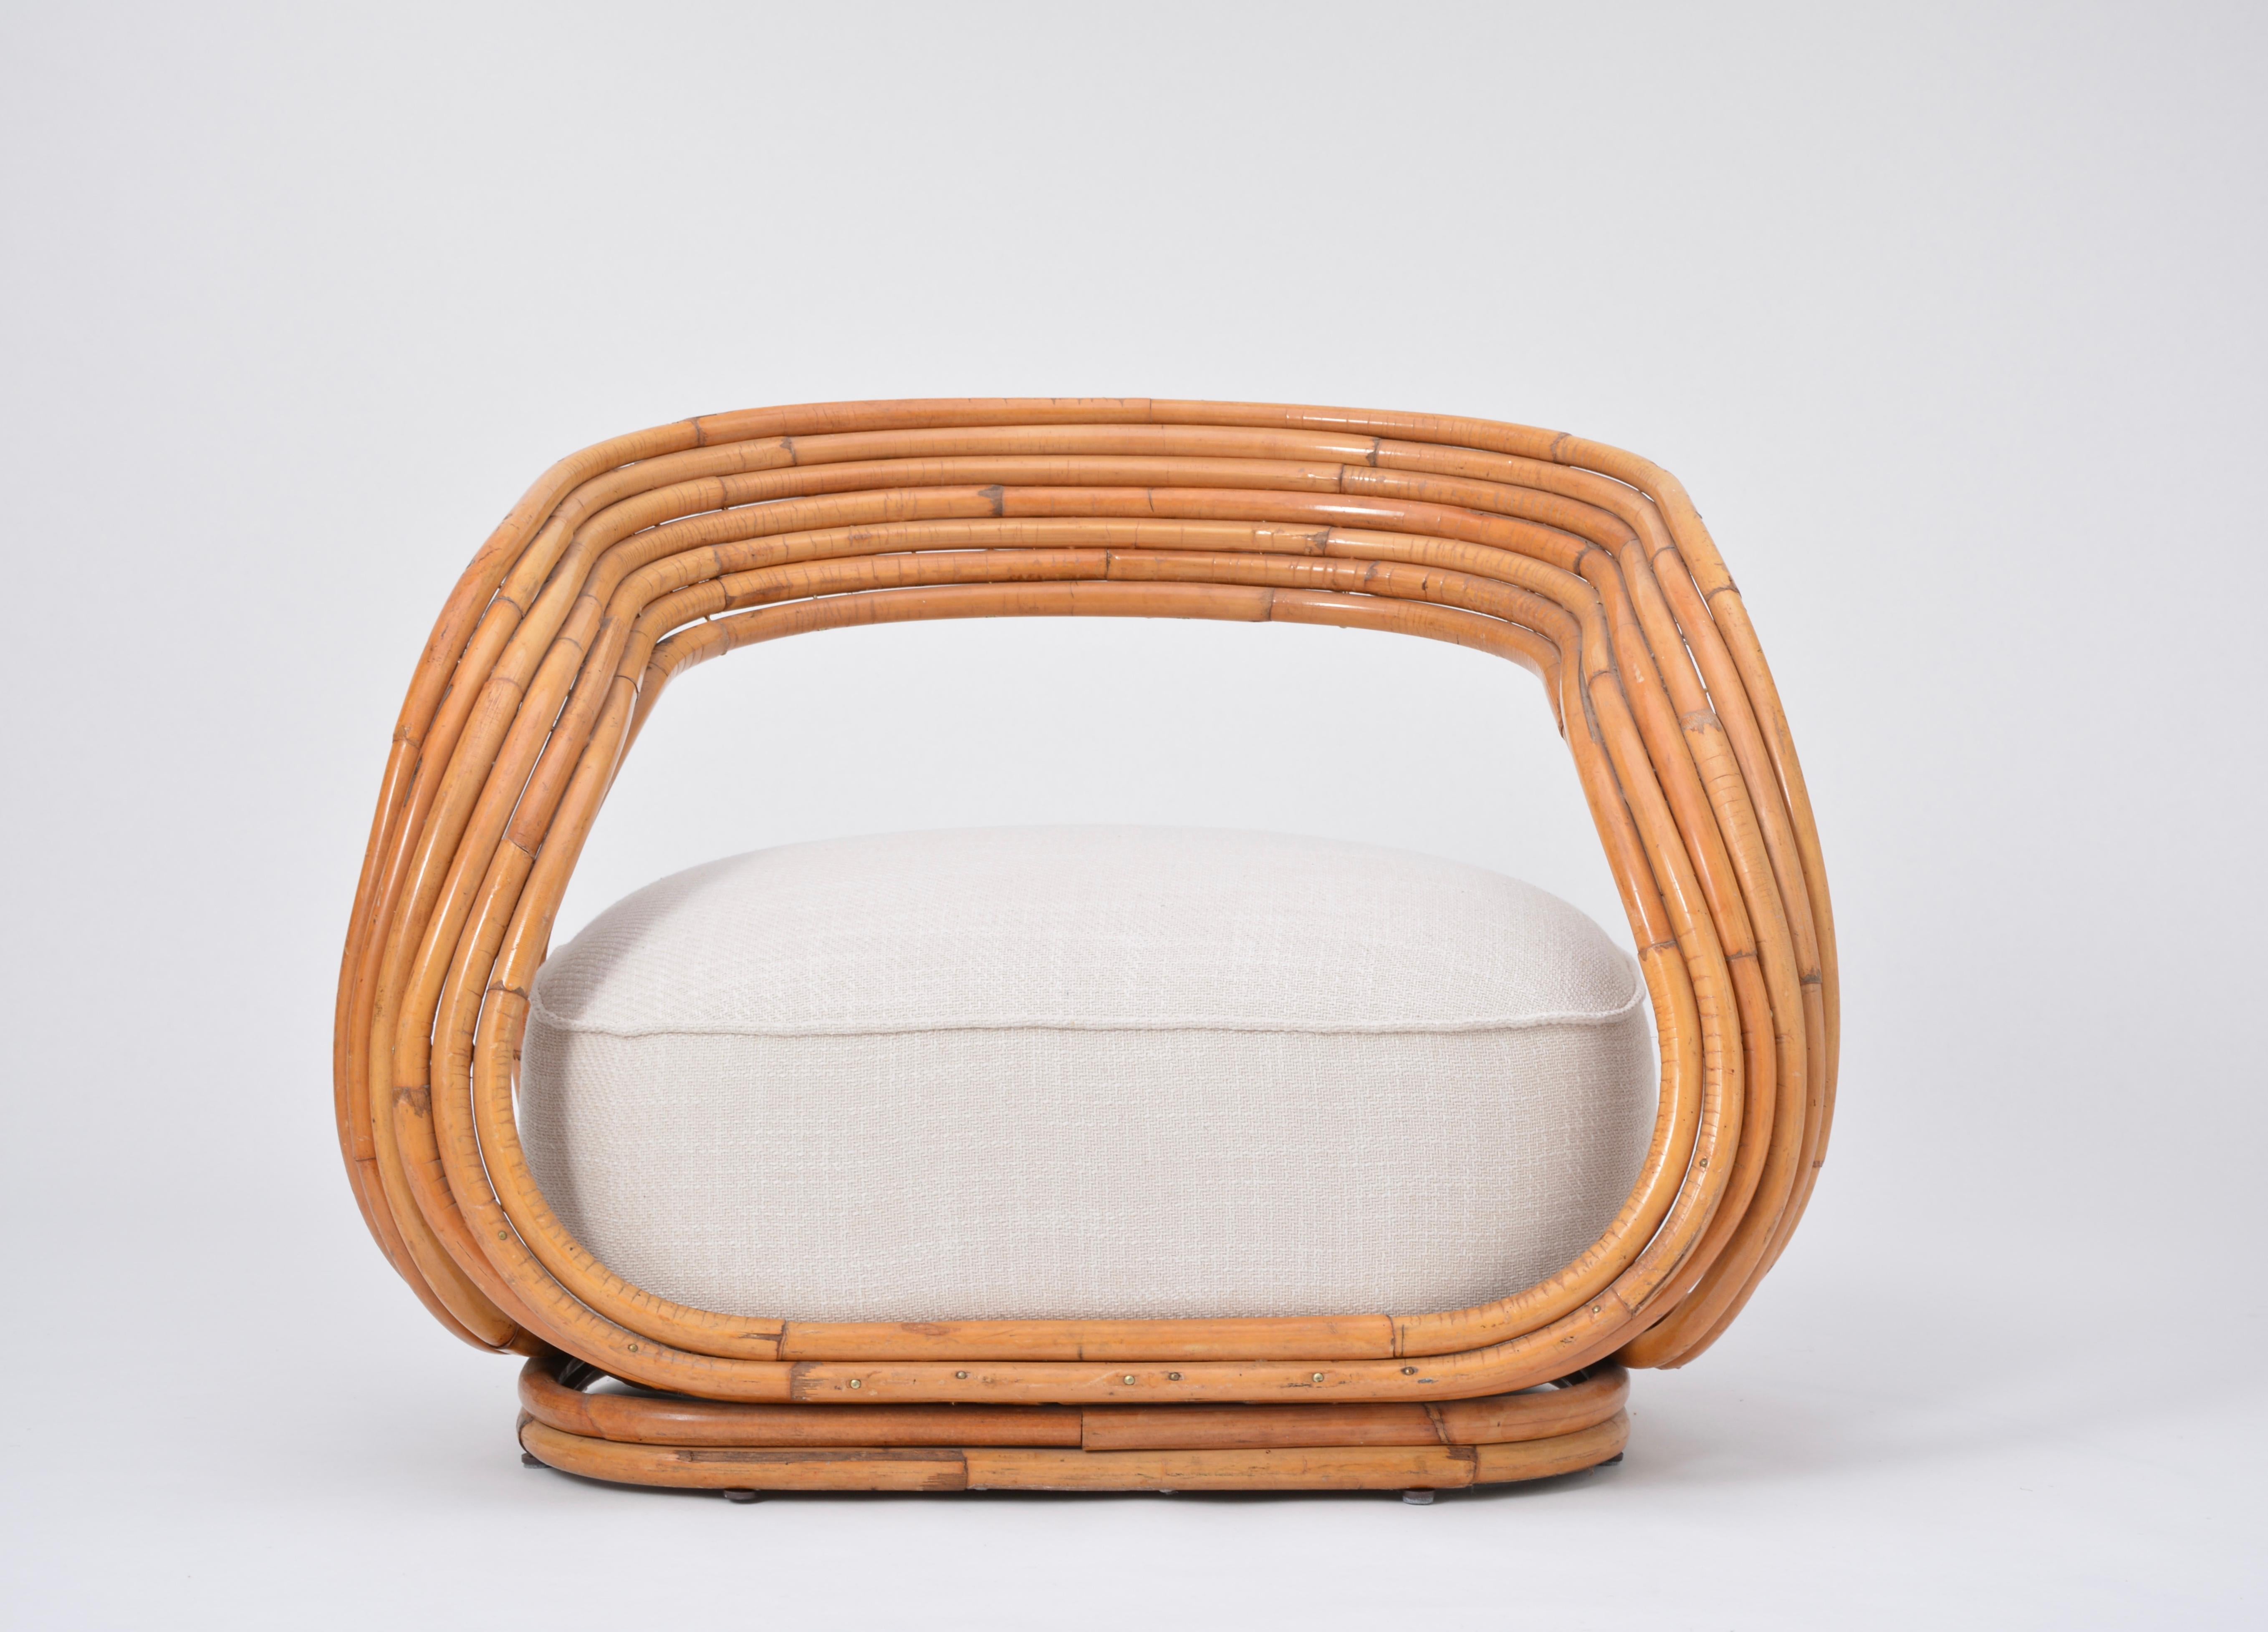 Eva armchair designed by Giovanni Travasa in 1965. Produced by Vittorio Bonacina in Italy.
Rattan structure. Its structure is accomplished by bringing together the rattan and curving it by the use of fire. The ample cushion filling provides a